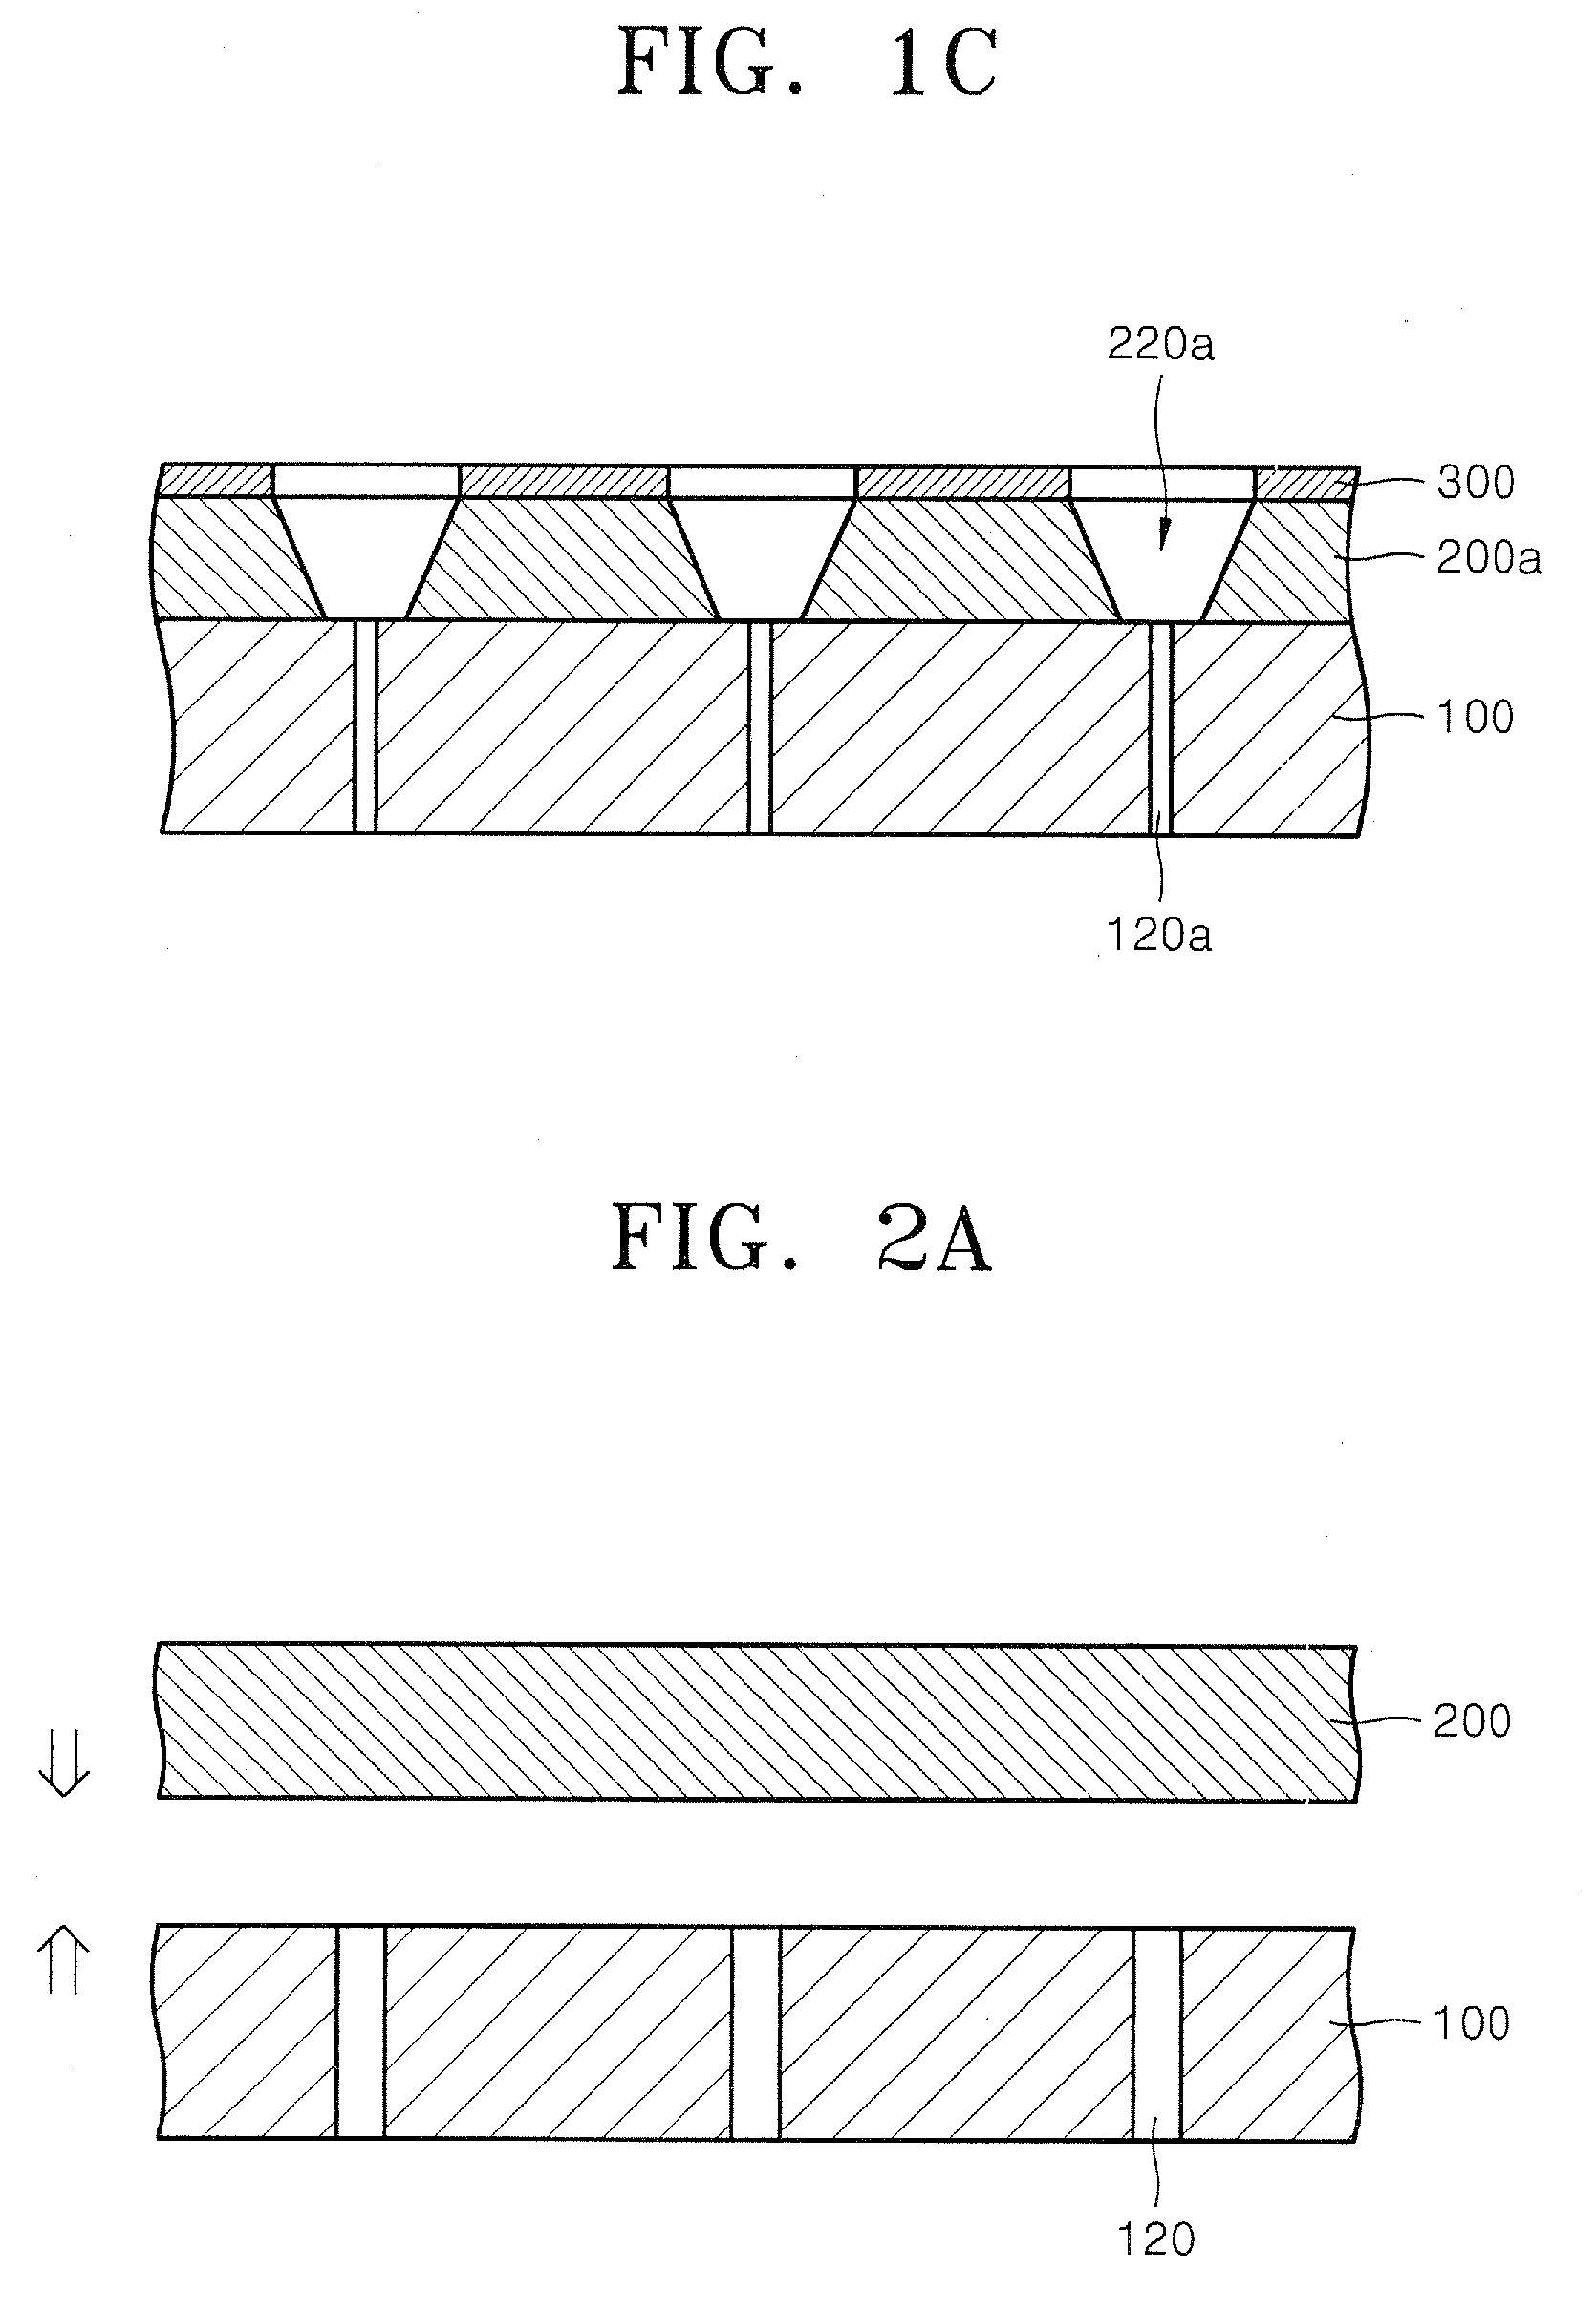 Mold for forming conductive bump, method of fabricating the mold, and method of forming bump on wafer using the mold